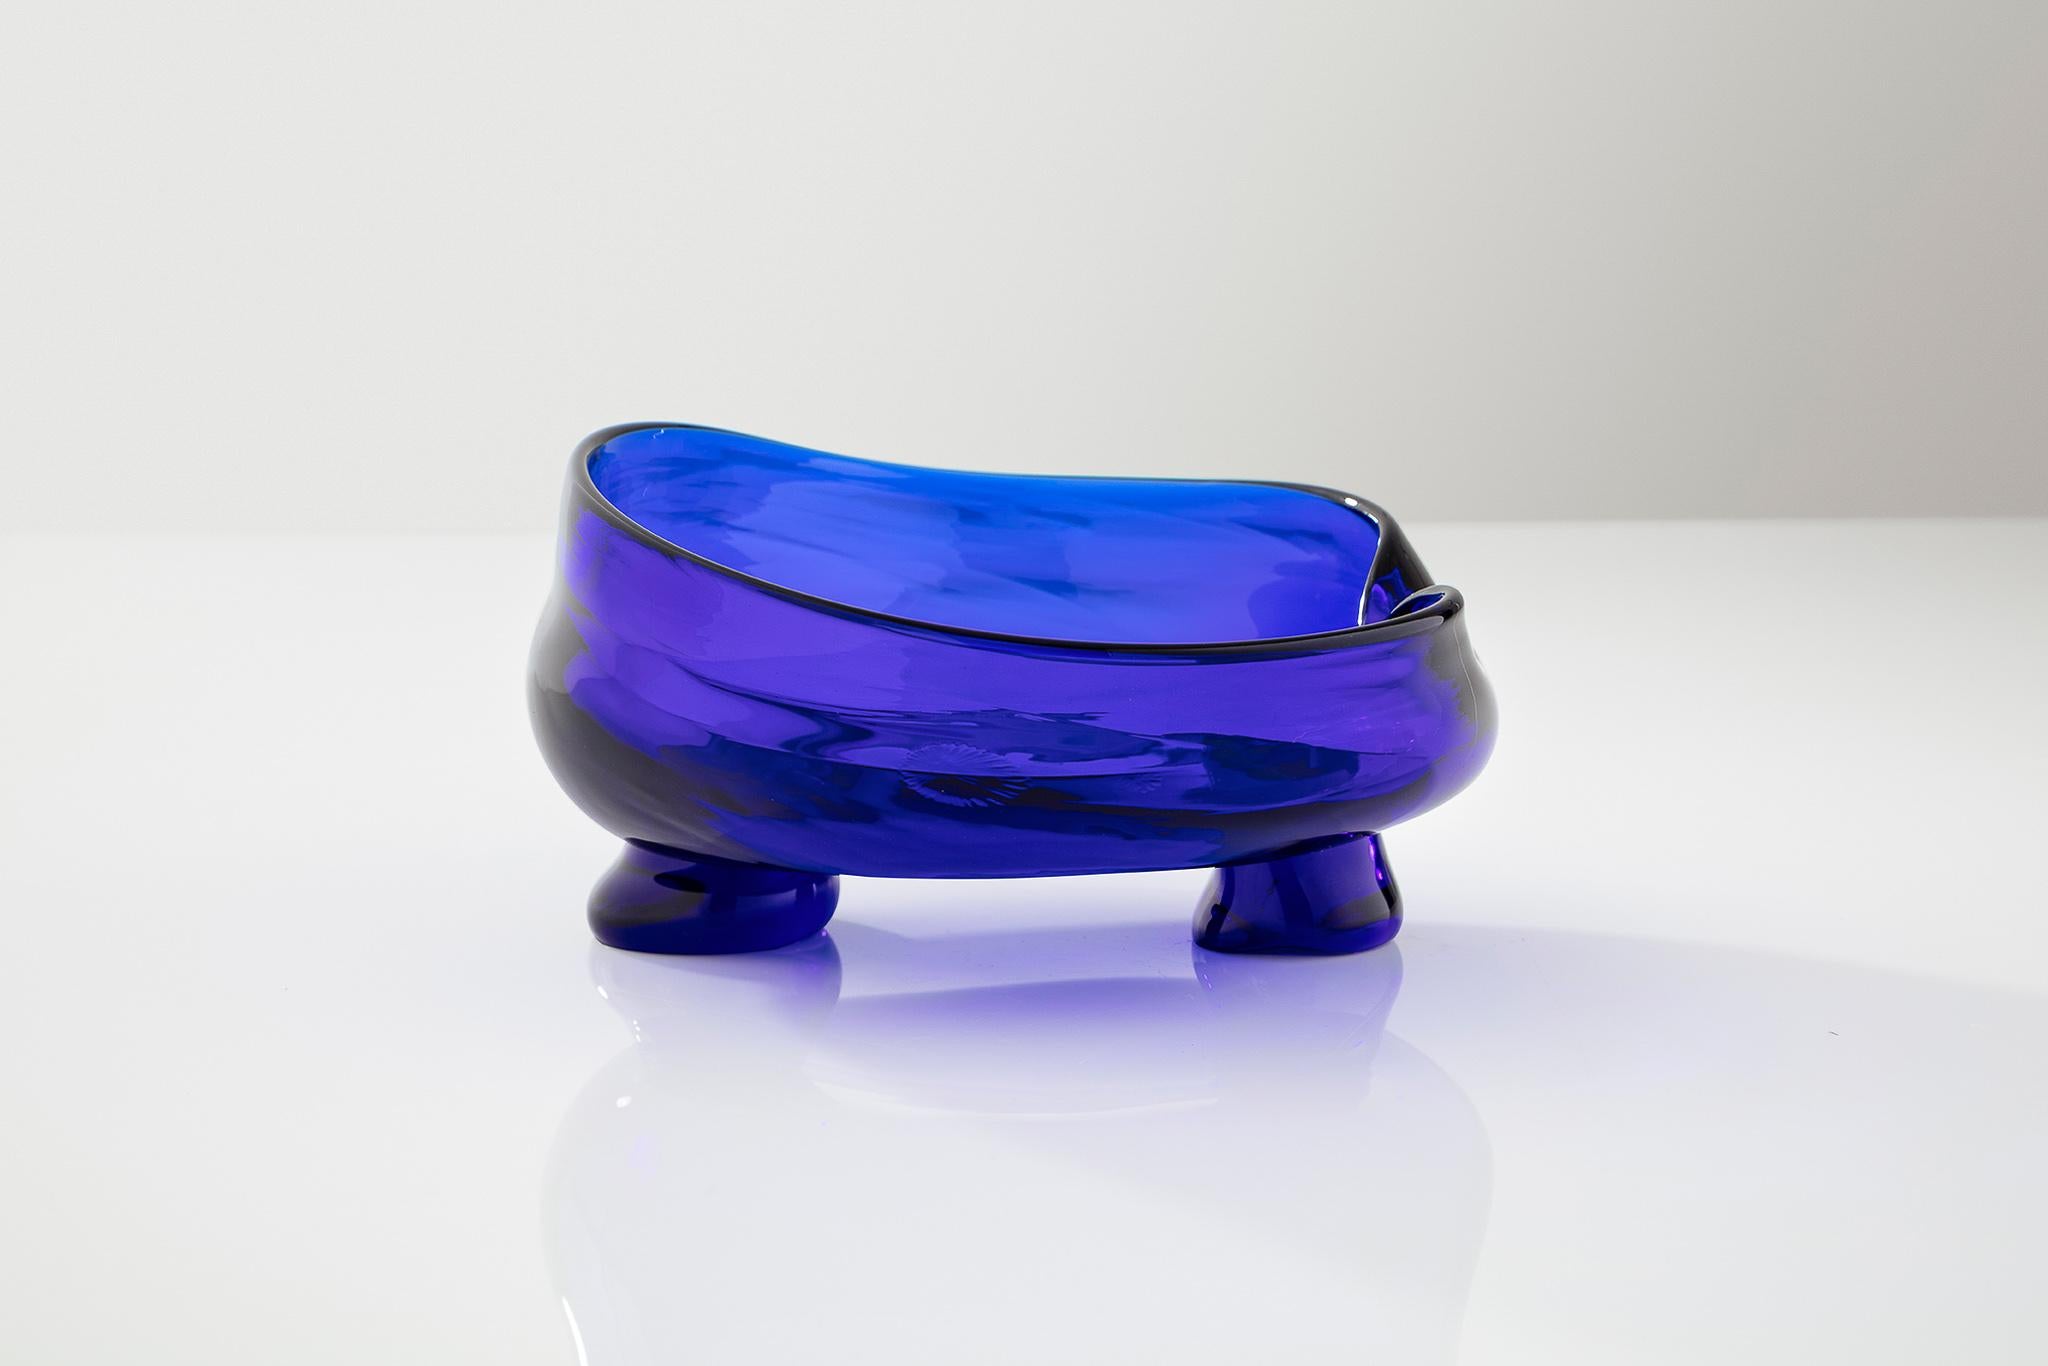 Fluid in form, this glass sculpture appears malleable with soothing slopes and rounded edges. Inspired by rolling waves, in Yves Klein Blue, this vibrant centerpiece is featured in the Fort Makers Blue Room collection.

Handmade by Jason Bauer and